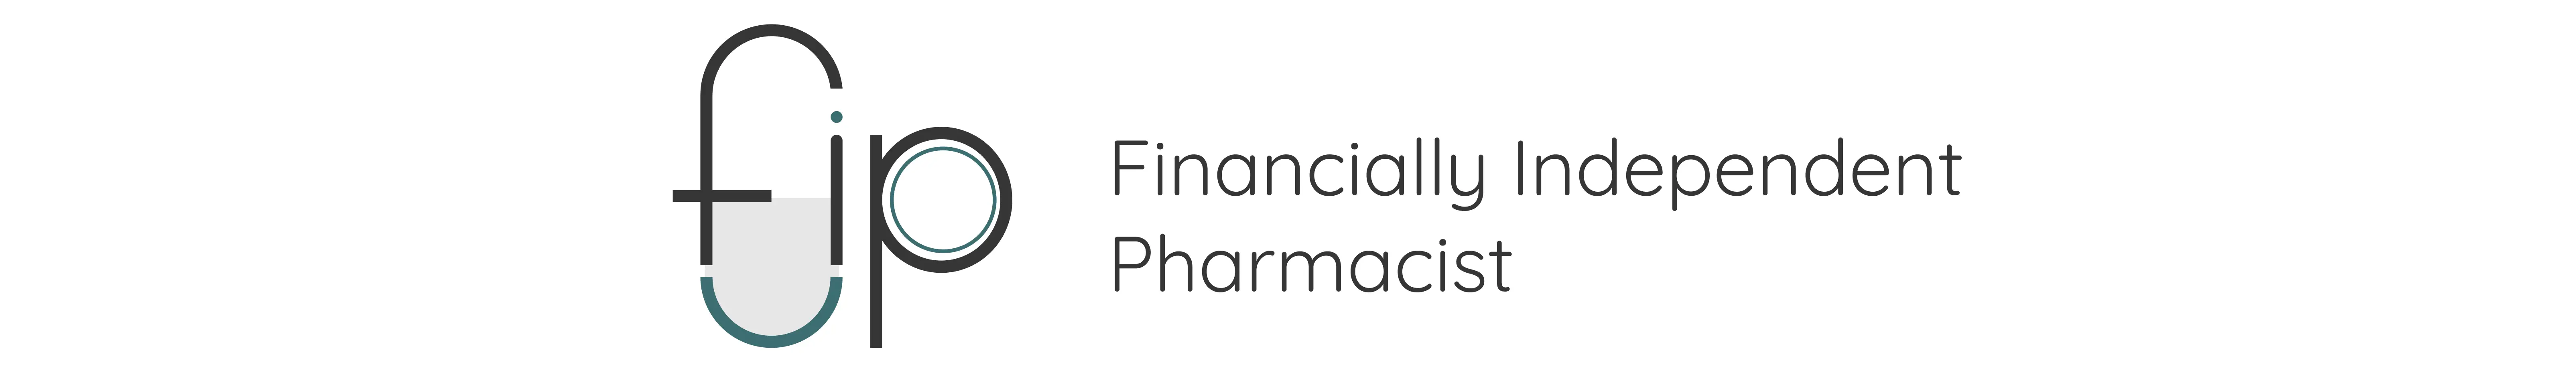 Financially Independent Pharmacist